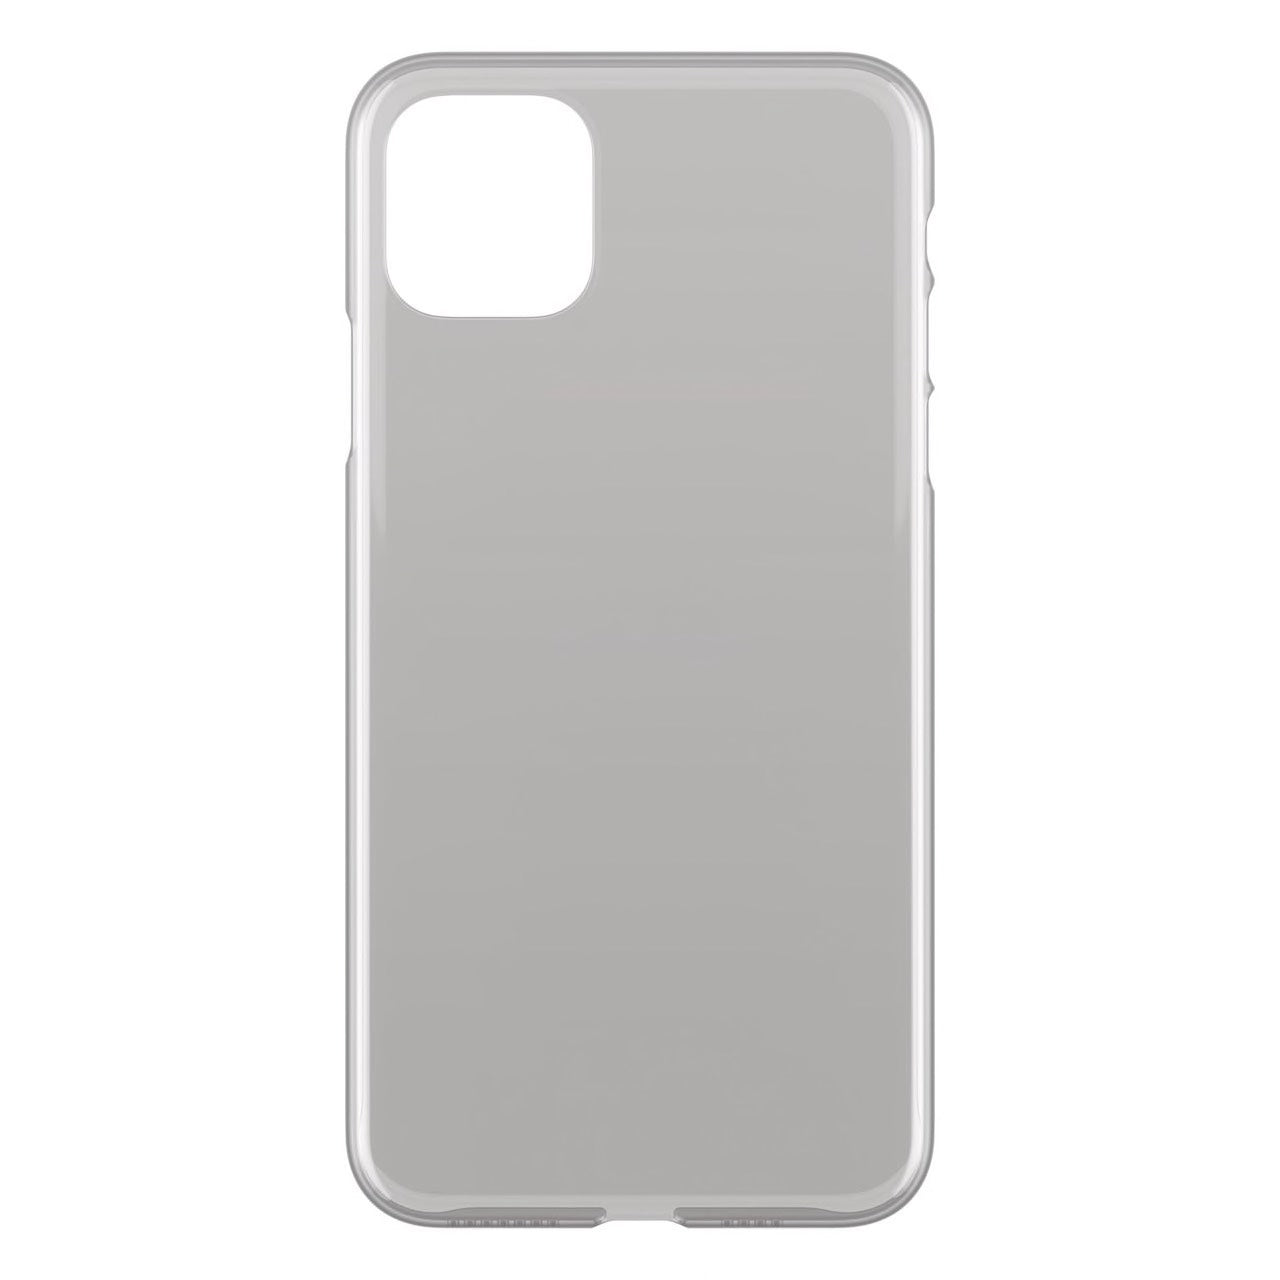 Air Jacket for iPhone 11 Pro Max - Clear Black